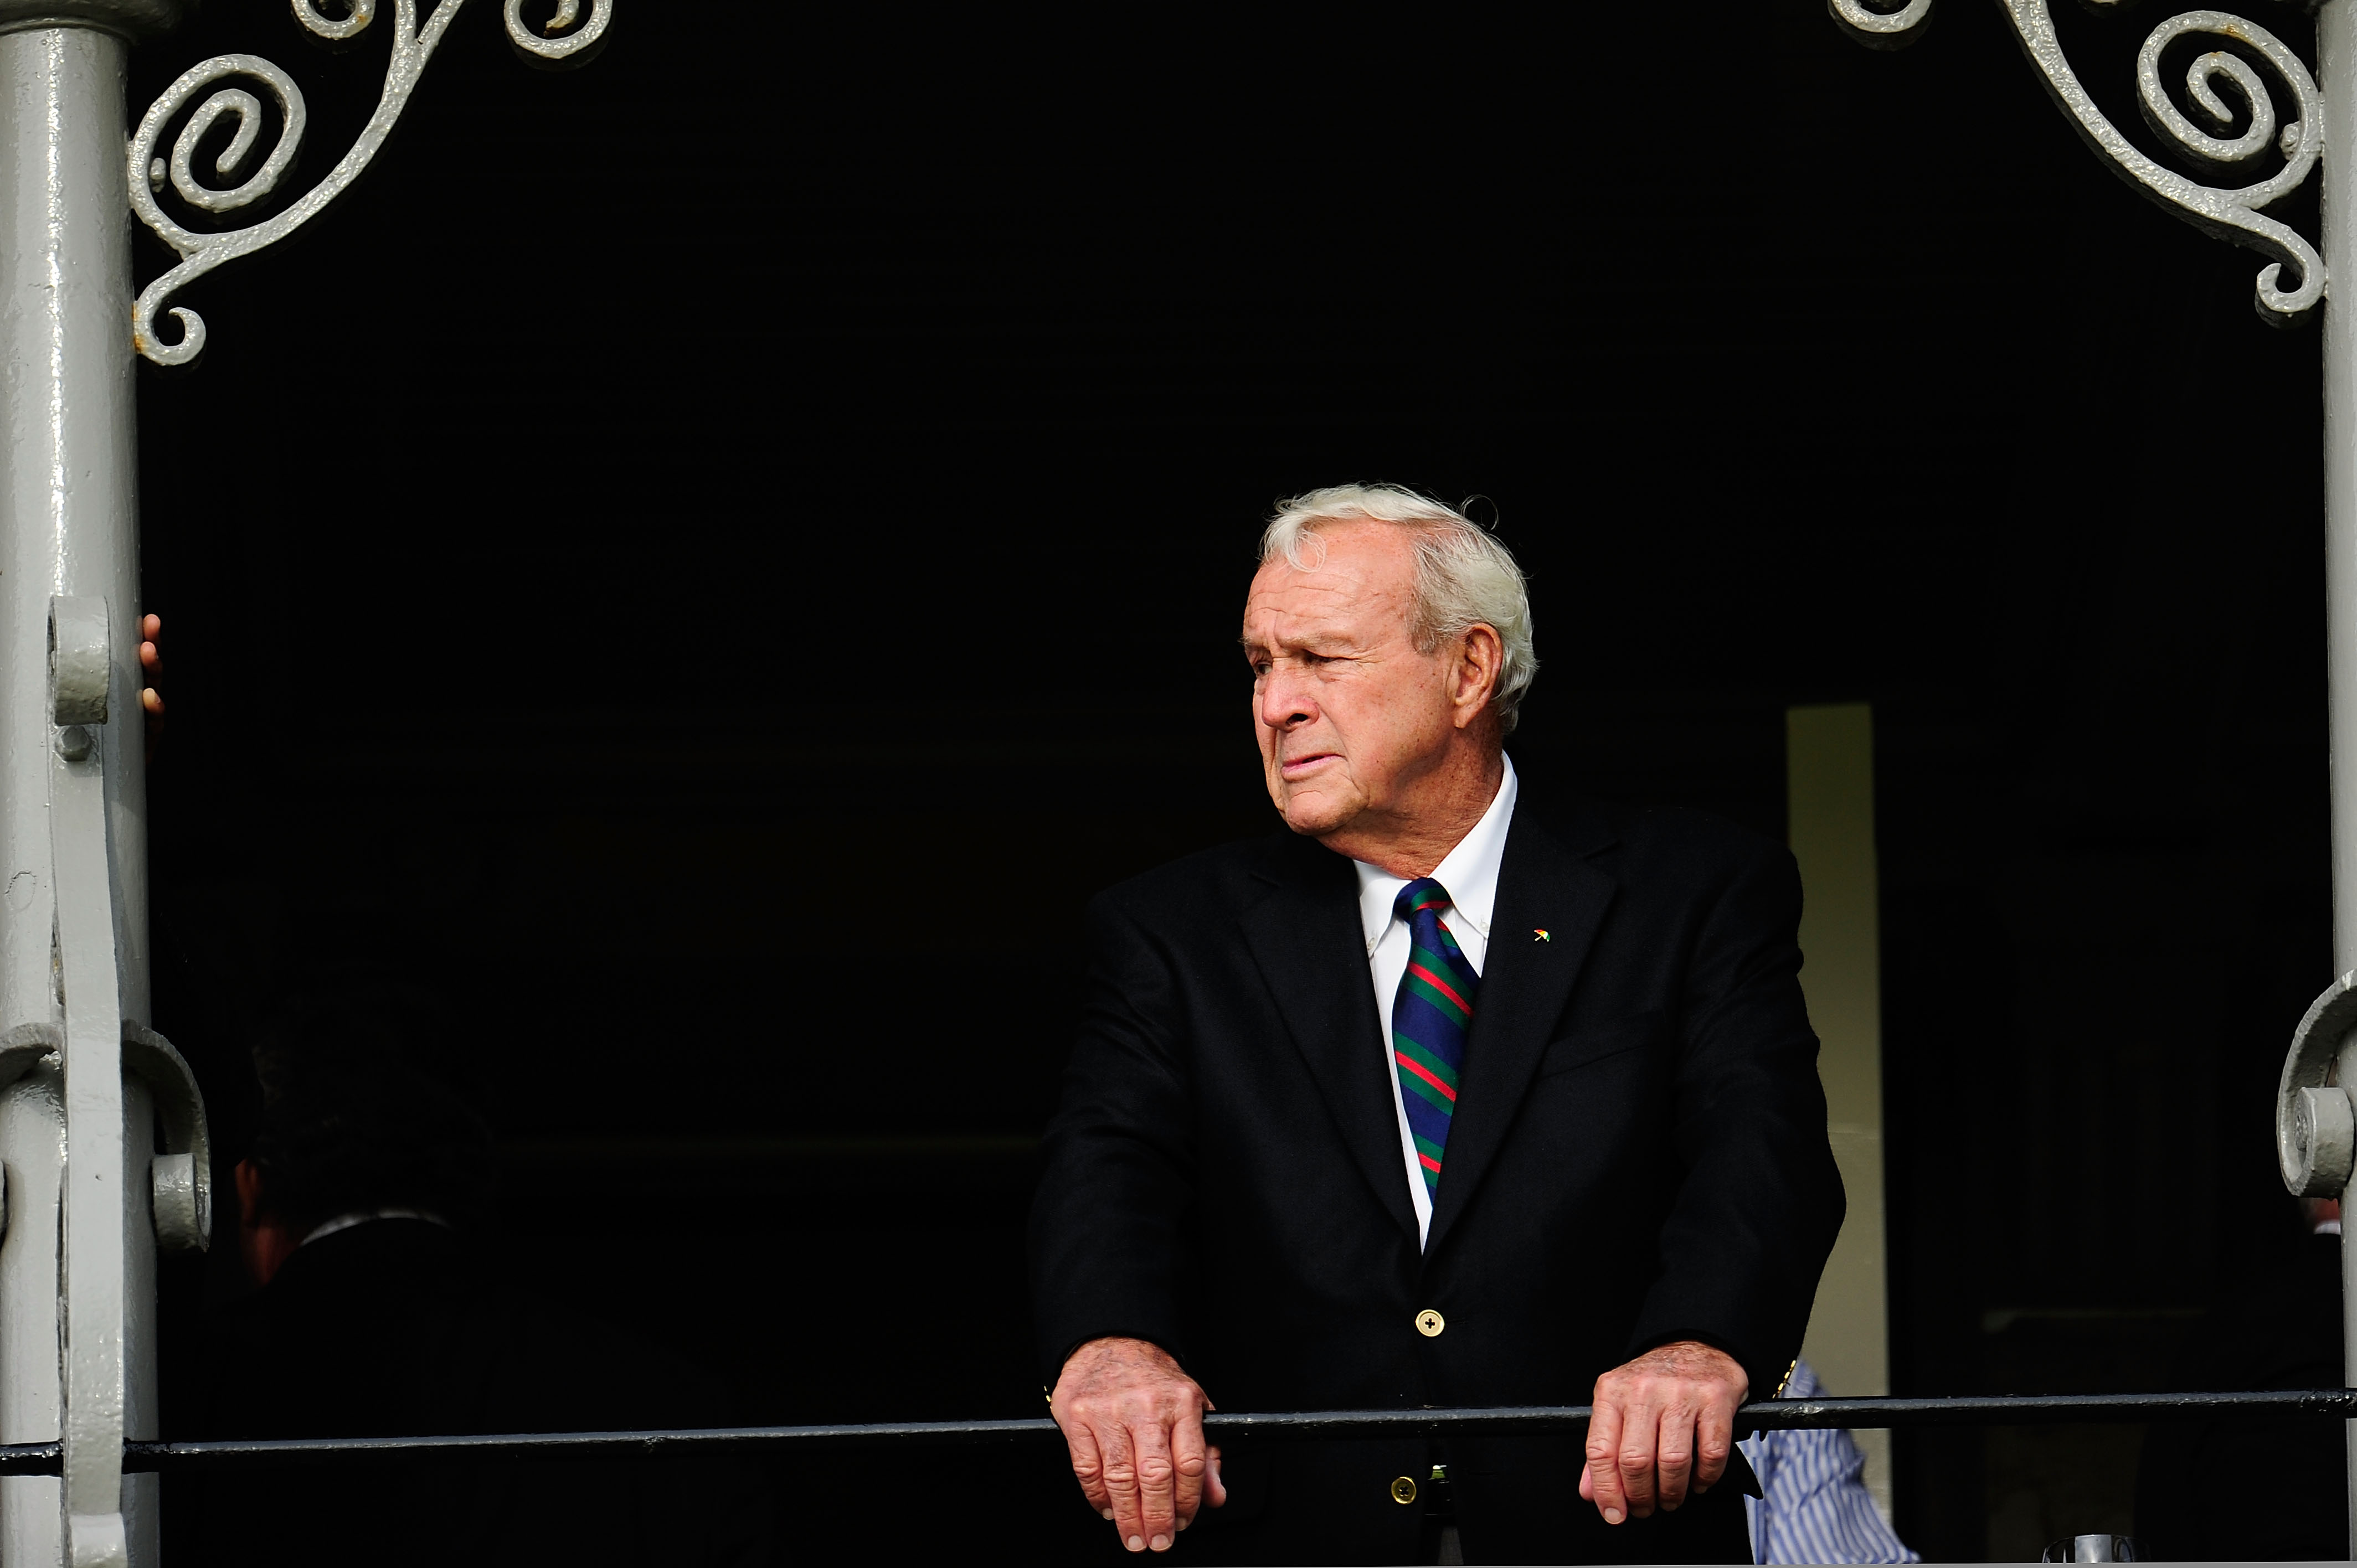 ST ANDREWS, SCOTLAND - JULY 13:  Arnold Palmer of the USA stands on the balcony before the past champions dinner before the 139th Open Championship on the Old Course, St Andrews on July 13, 2010 in St Andrews, Scotland.  (Photo by Stuart Franklin/Getty Im